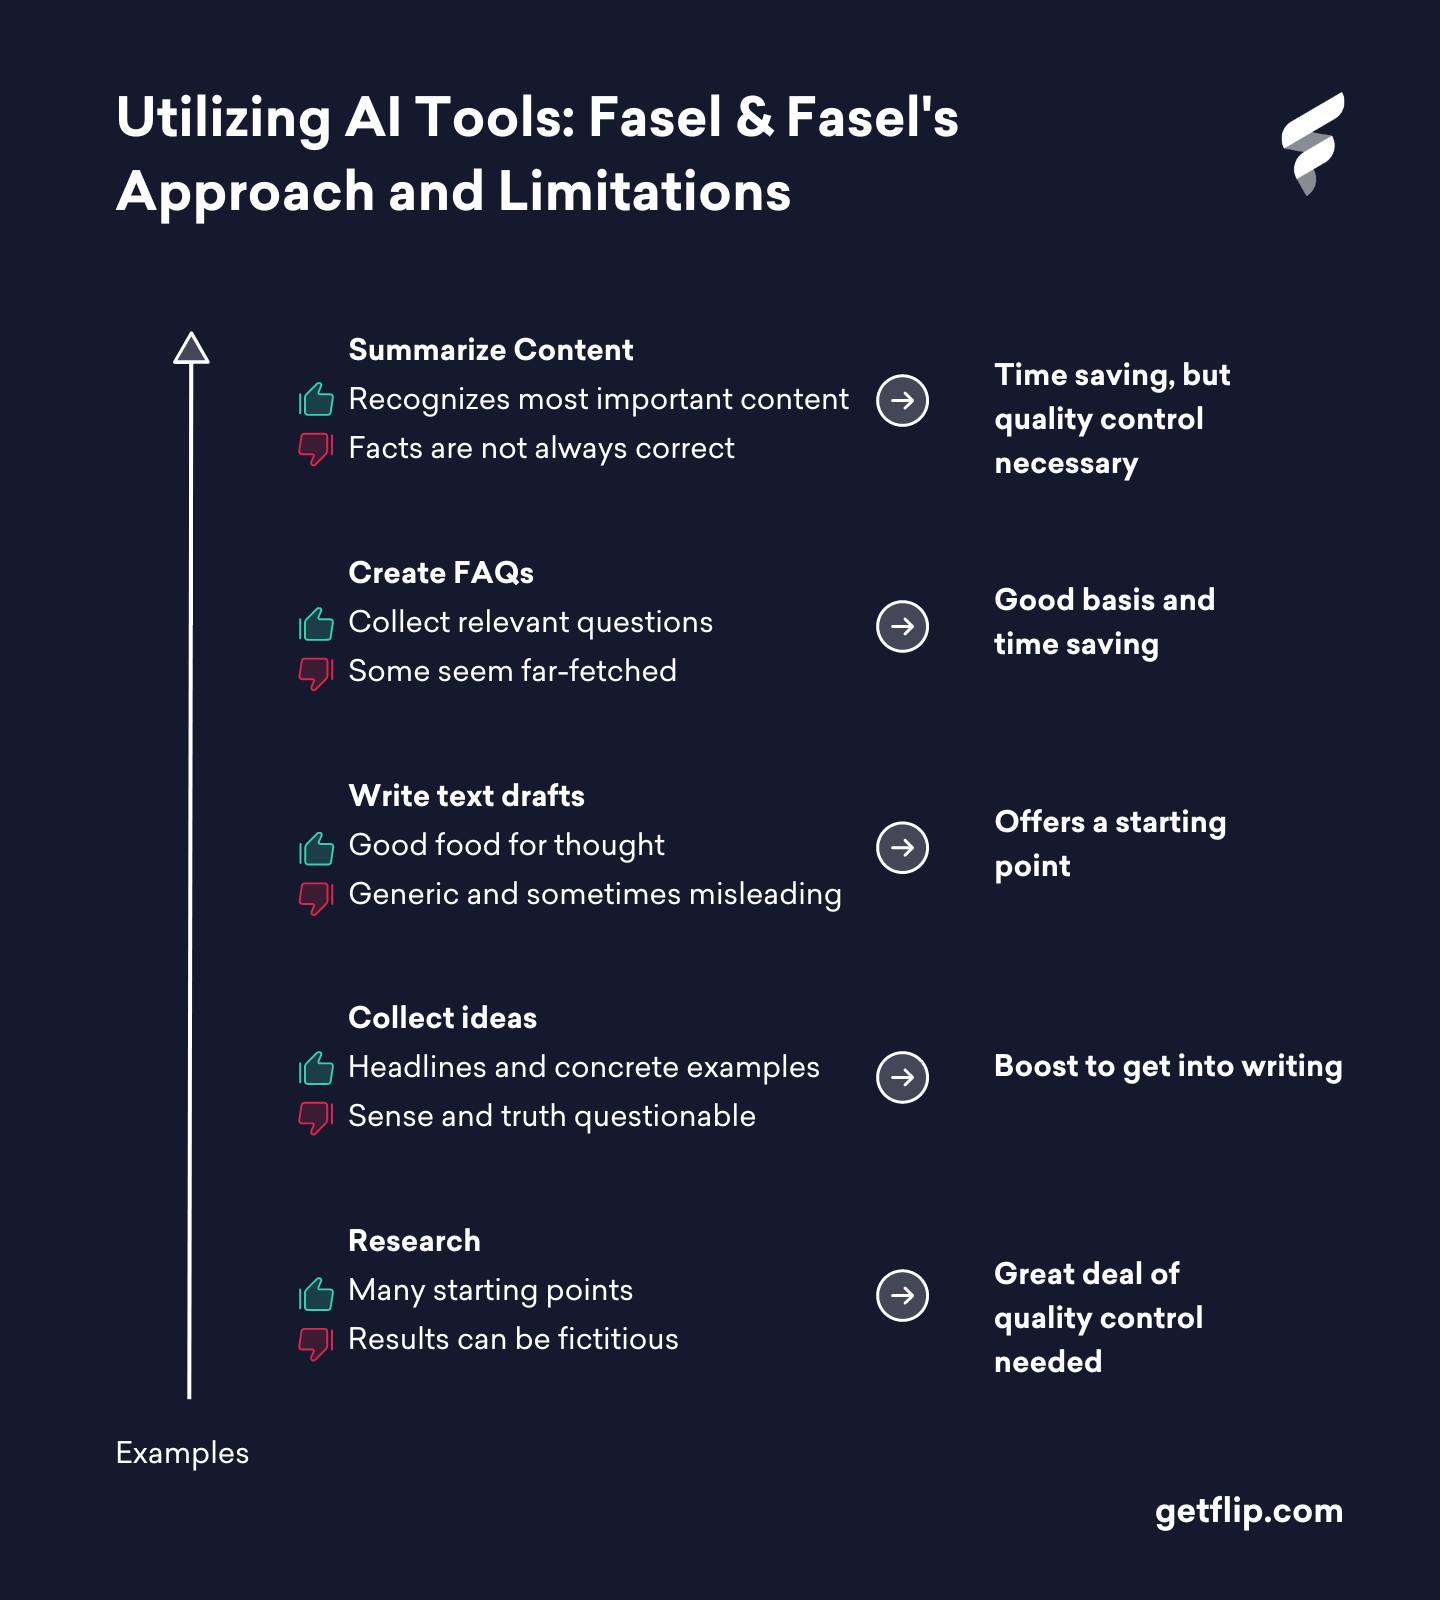 An Infographic showcasing applications and limitations of utilizing AI Tools